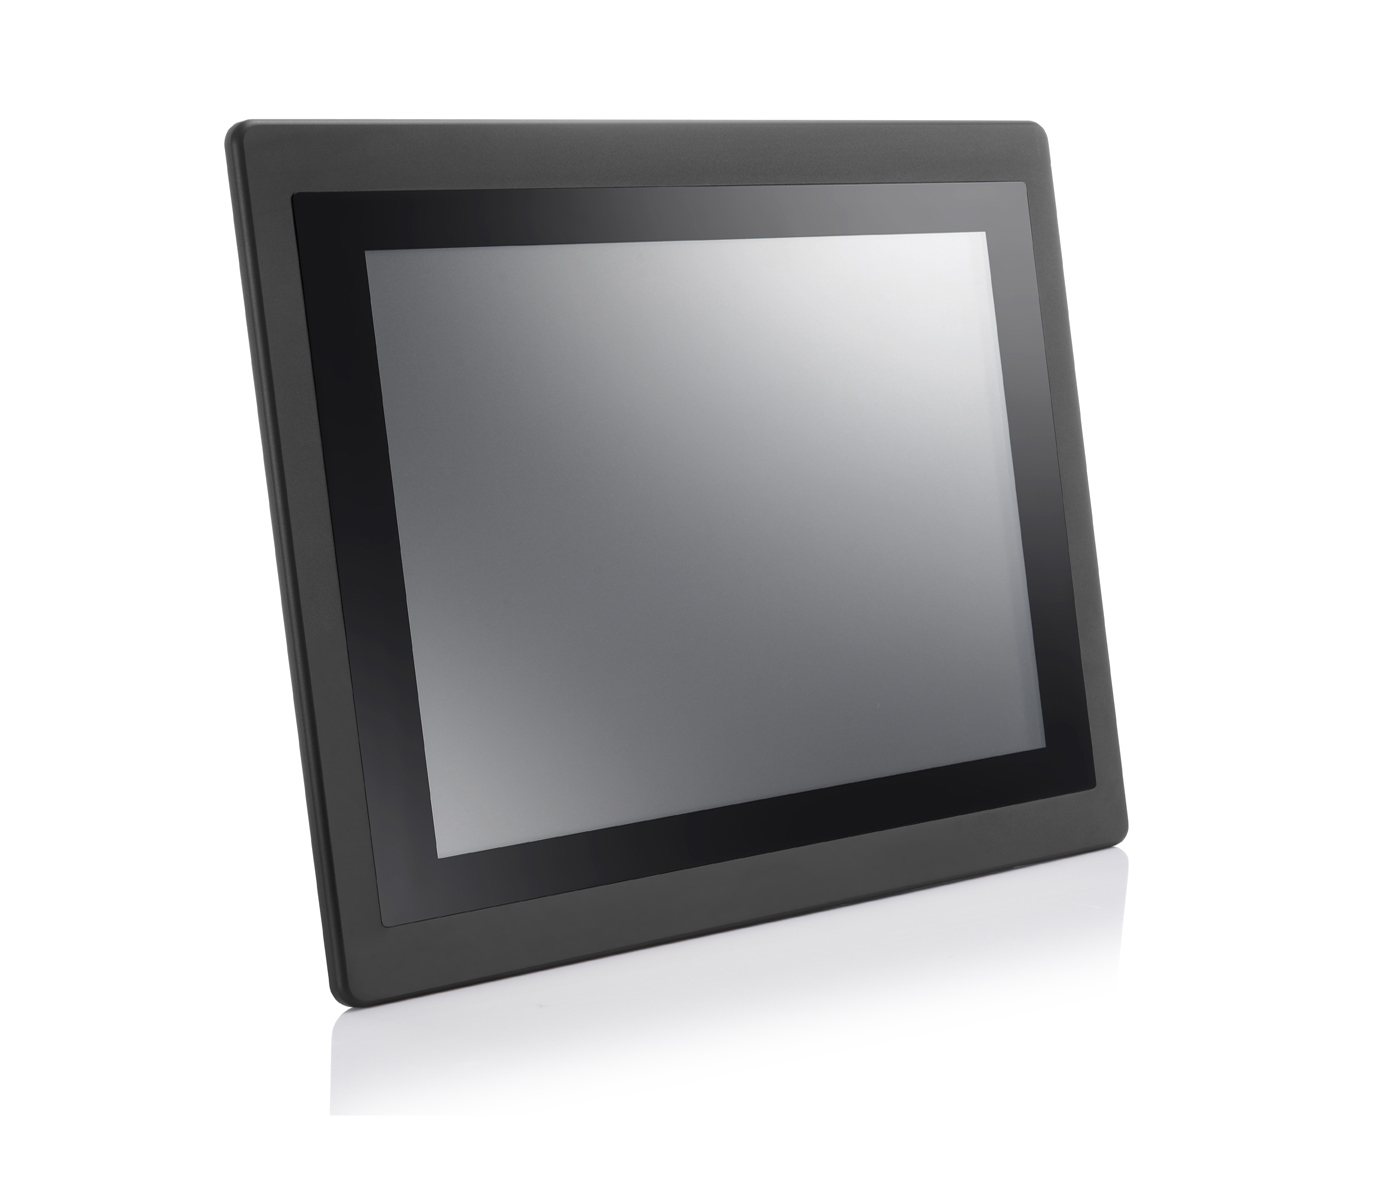 Industrial Fanless Hign Performance Touch Panel PC